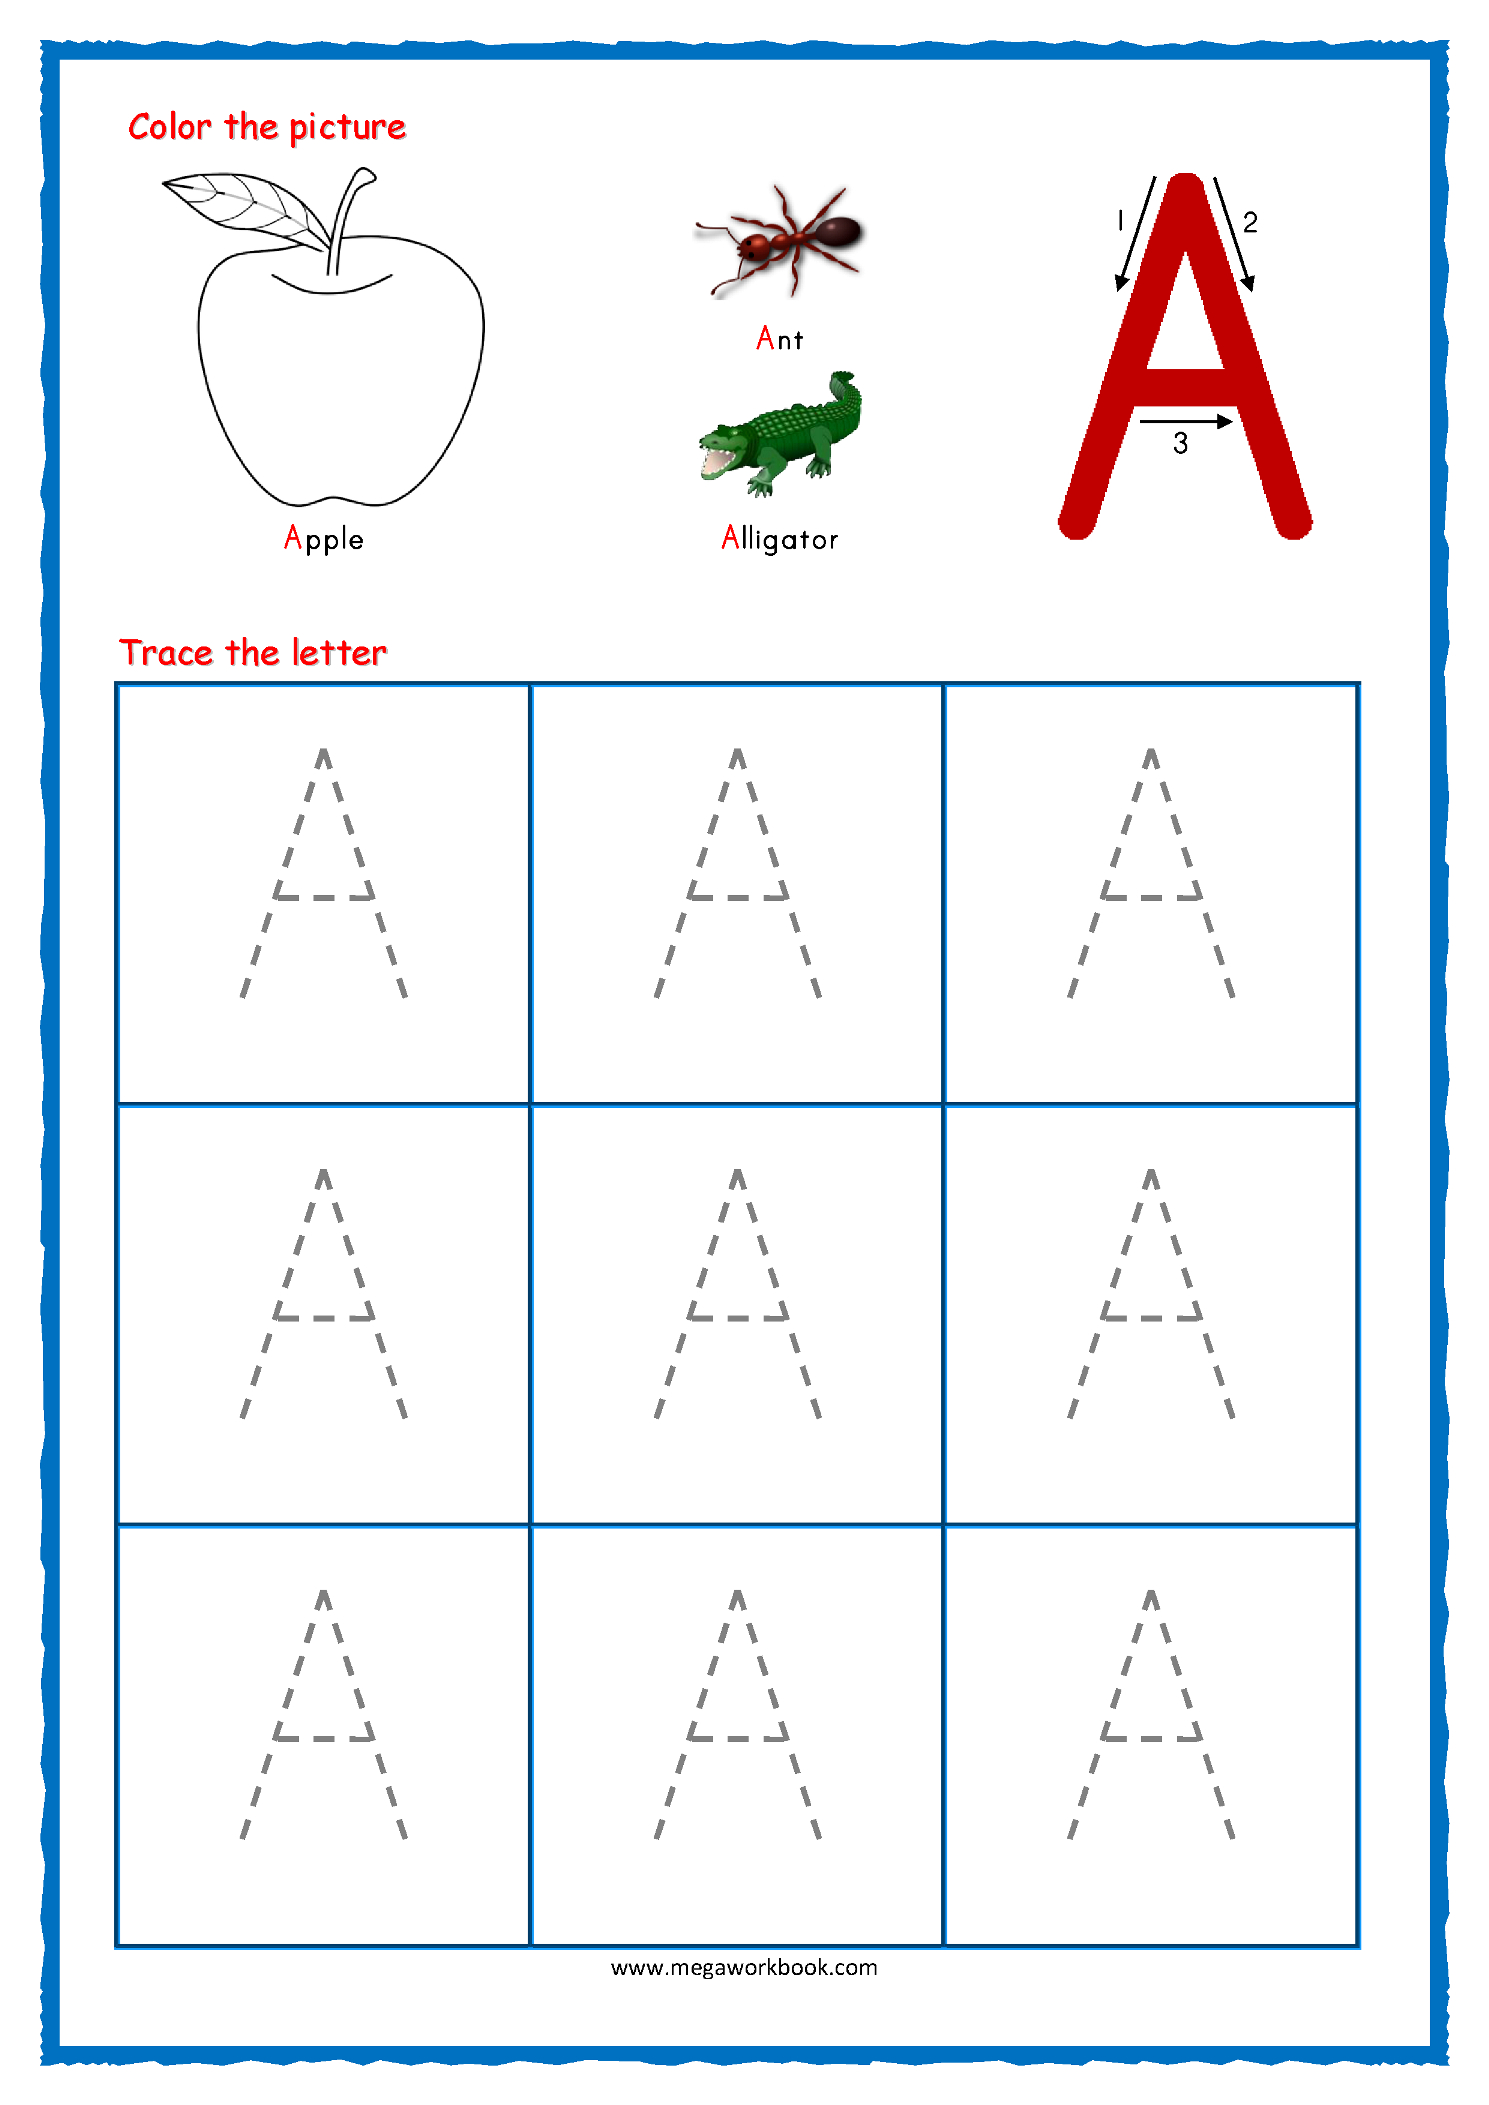 Coloring Book : Coloring Book Alphabet Tracing Worksheets within Tracing Letters Printable Free